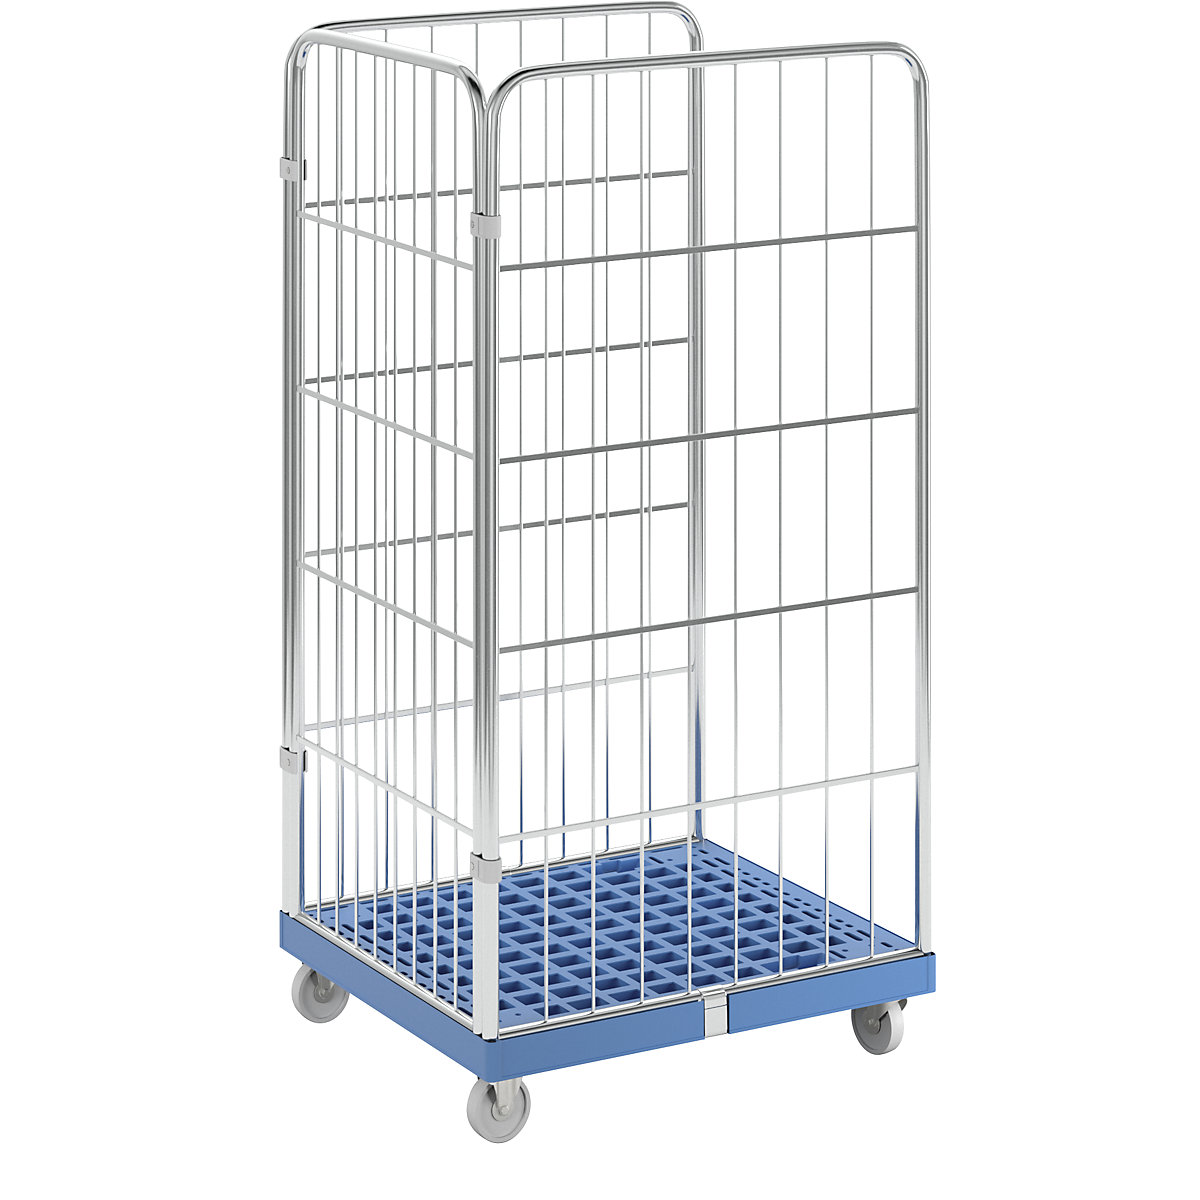 Roll container with mesh panels, plastic transport dolly, 3-sided, blue zinc plated mesh, with inclined shelf support-12